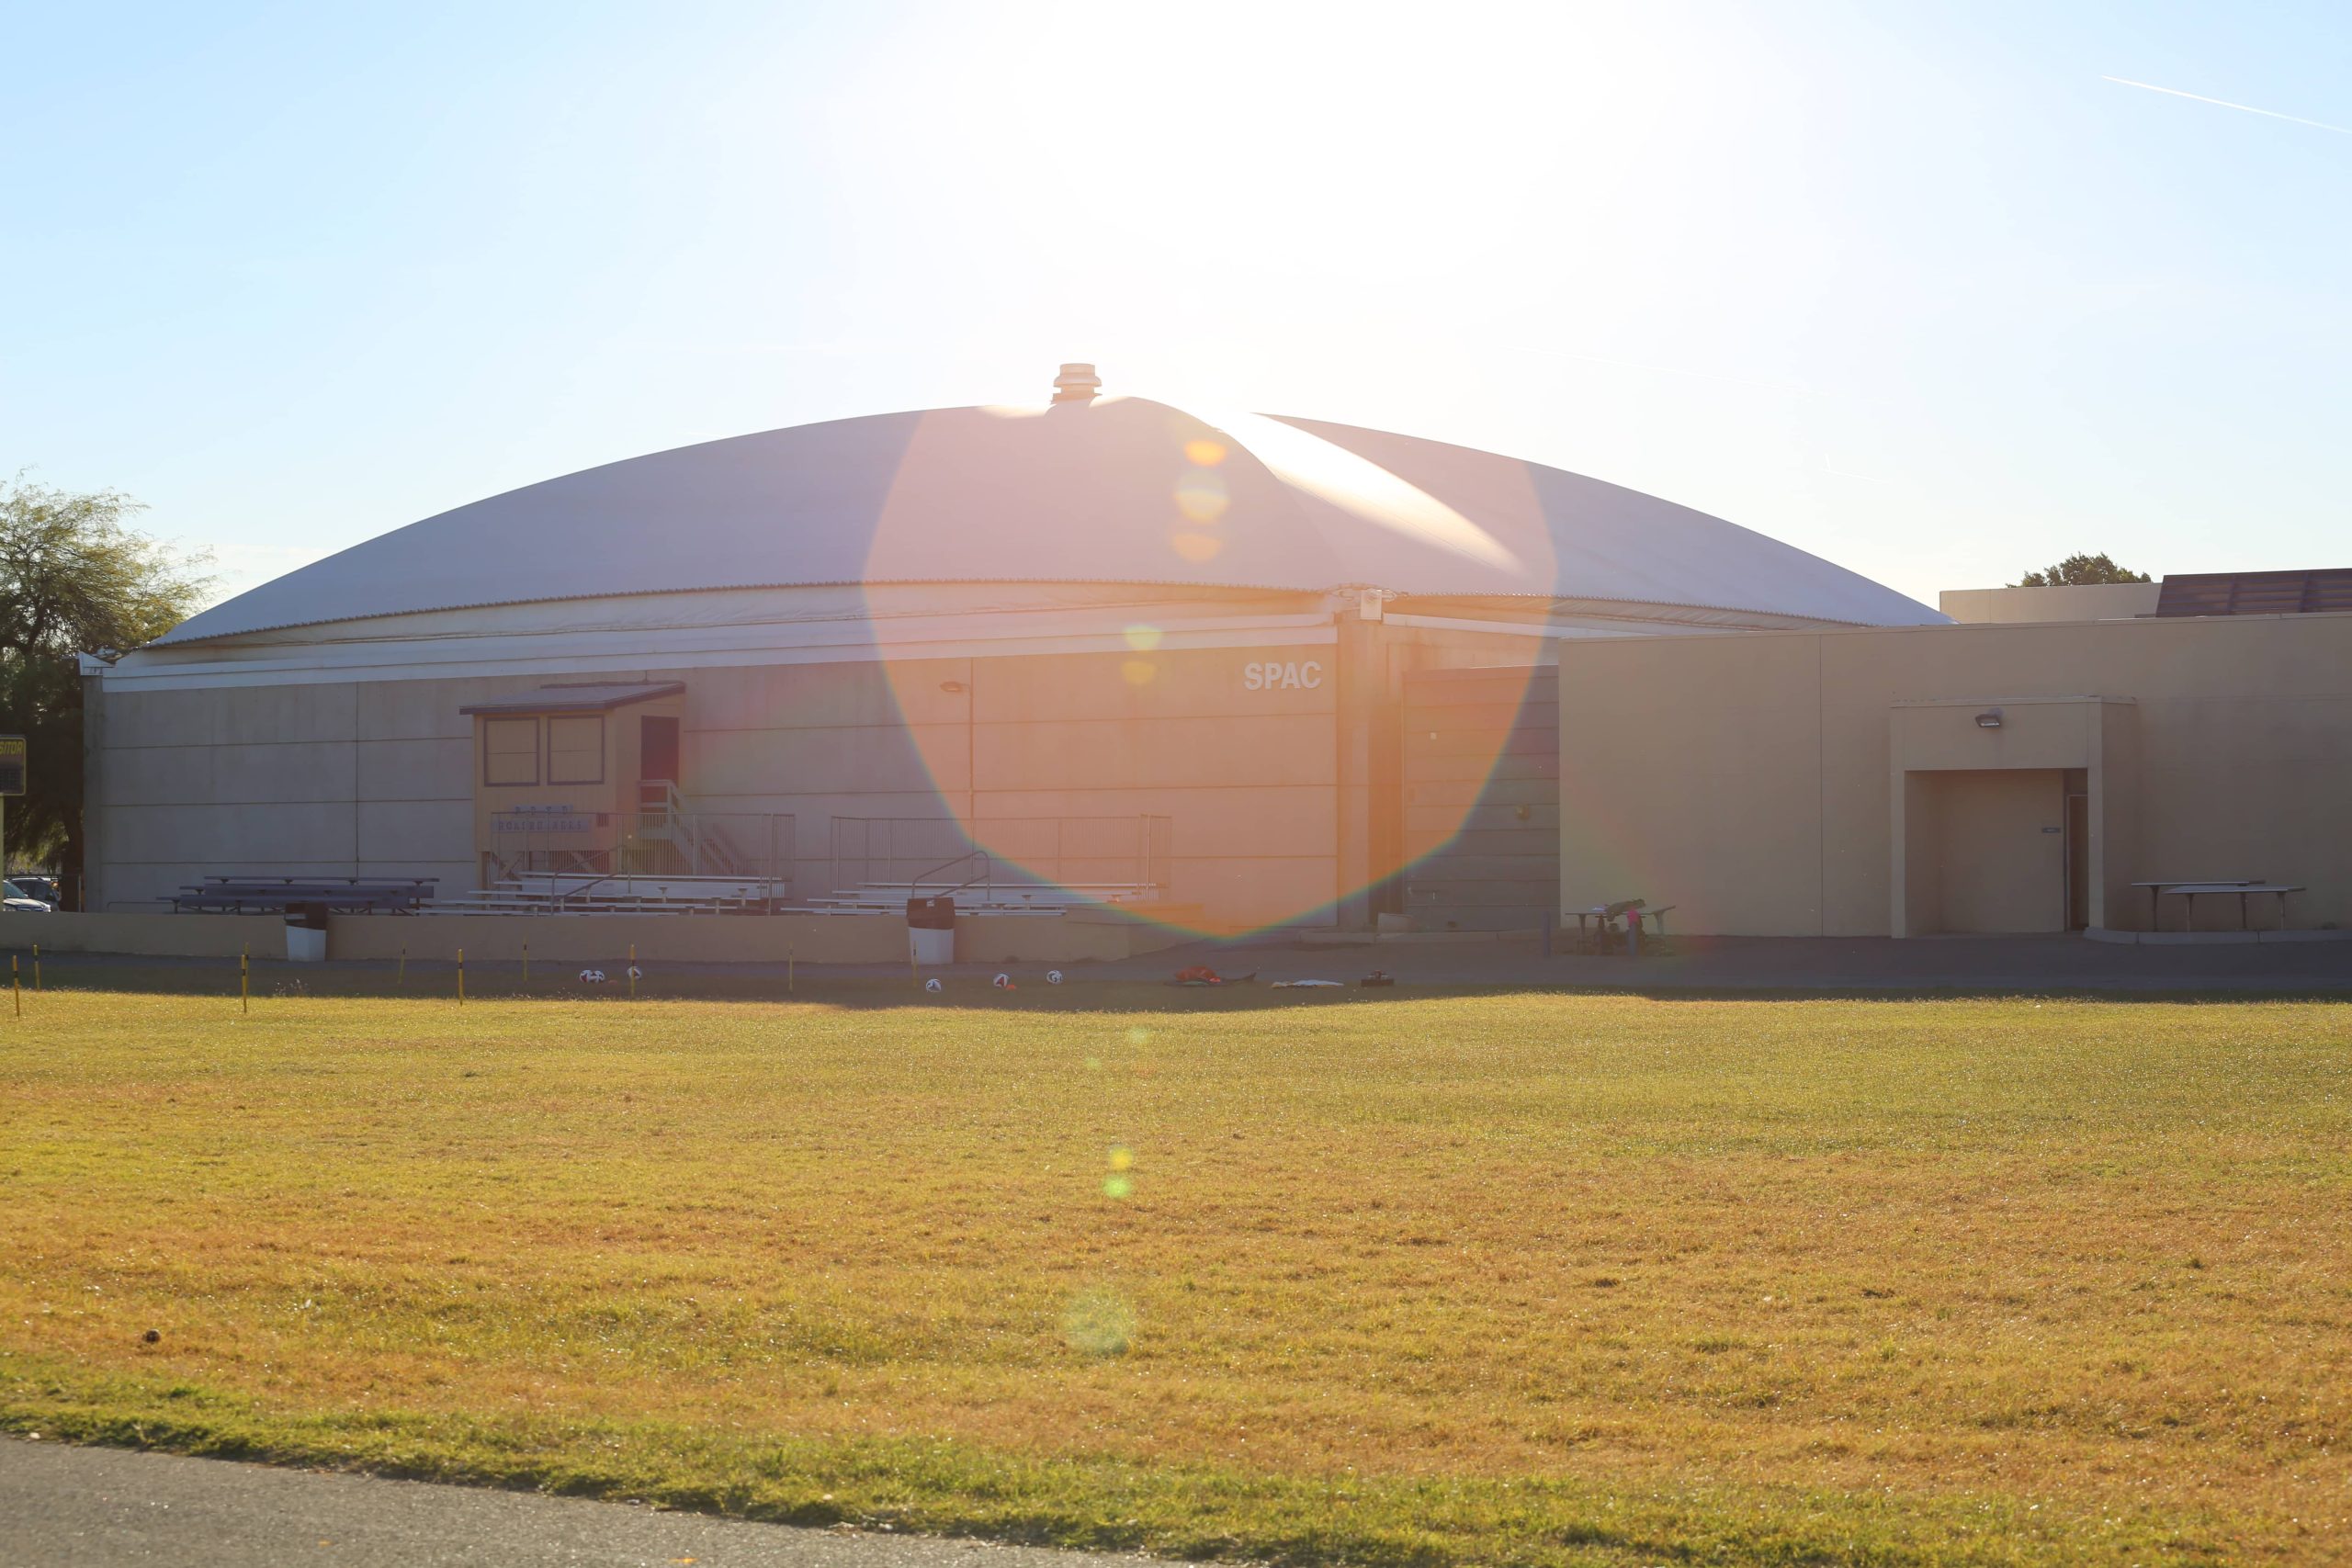 A panoramic photo of the SPAC building on PDSD campus. The large building is pictured in the late afternoon light. Overtop its concrete walls is a large, high strength, tent-like material which functions as the roof of the building.